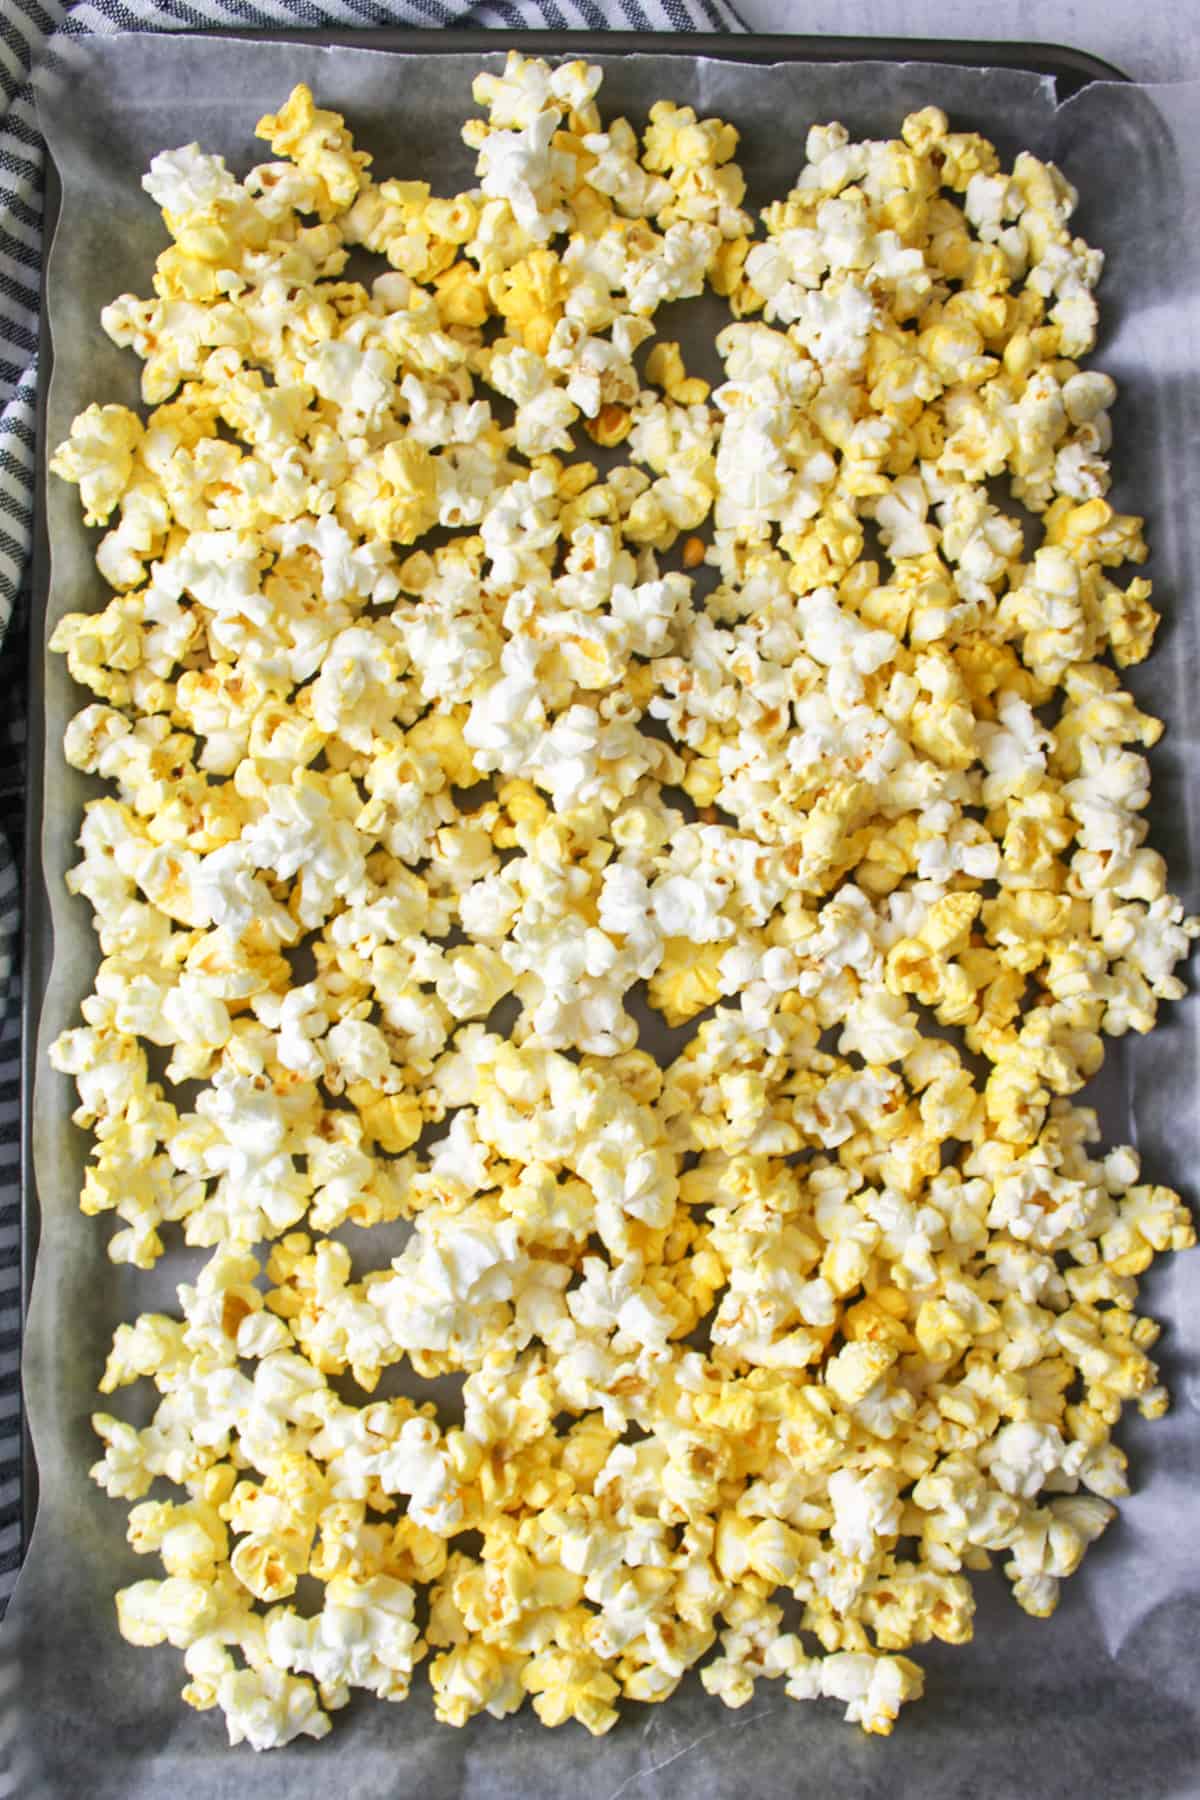 popcorn spread out on wax paper lined baking sheet.